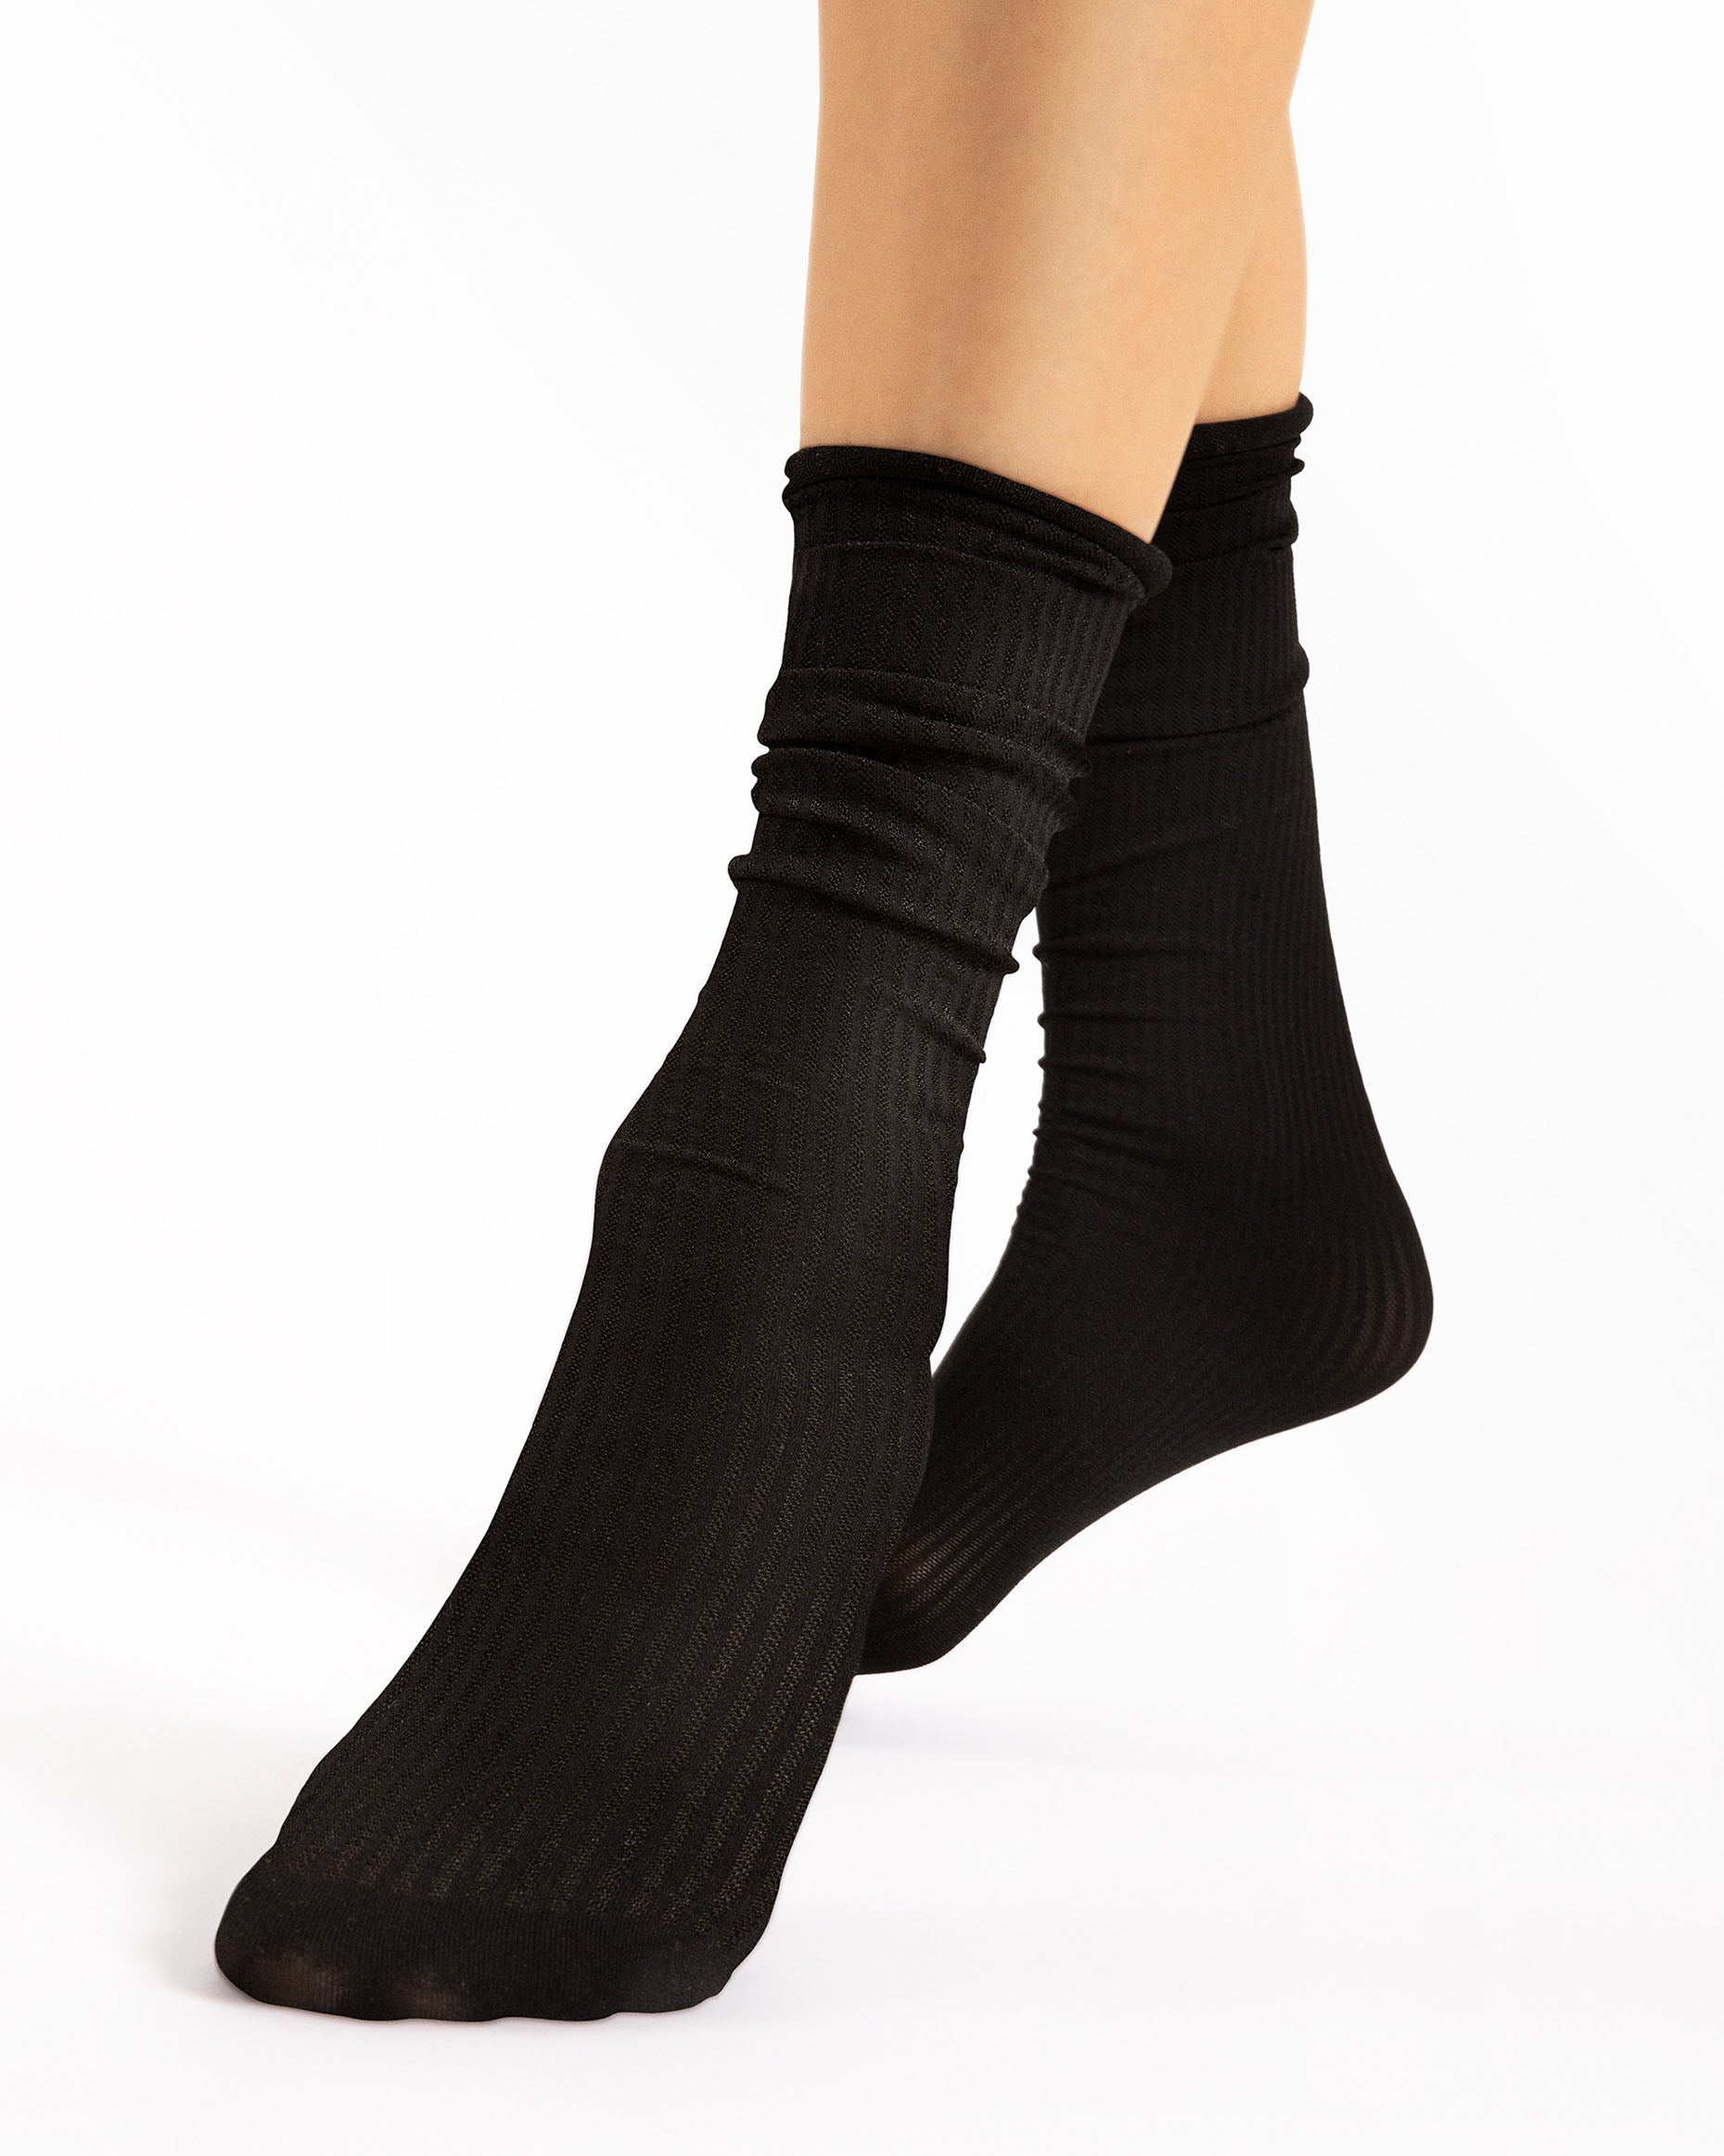 Fiore Cool Milk 60 Den Socks - Soft black ribbed opaque long scrunched ankle socks with no cuff, roll edge.